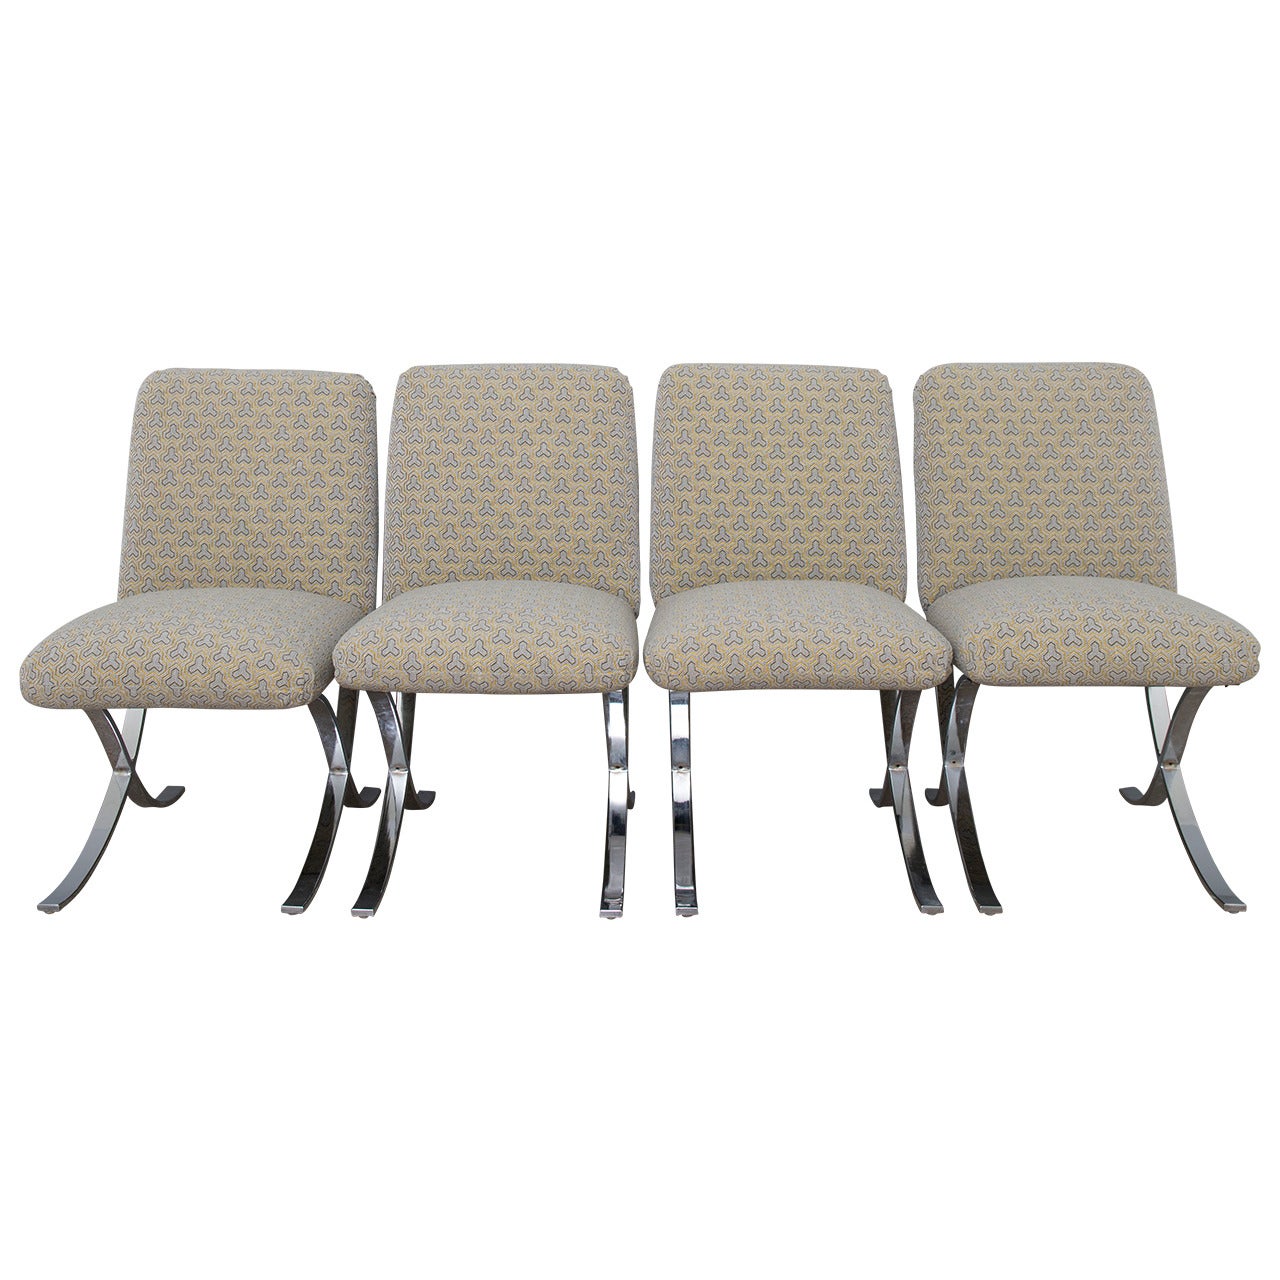 Set of 4 Milo Baughman for Directional X-Base Chairs For Sale